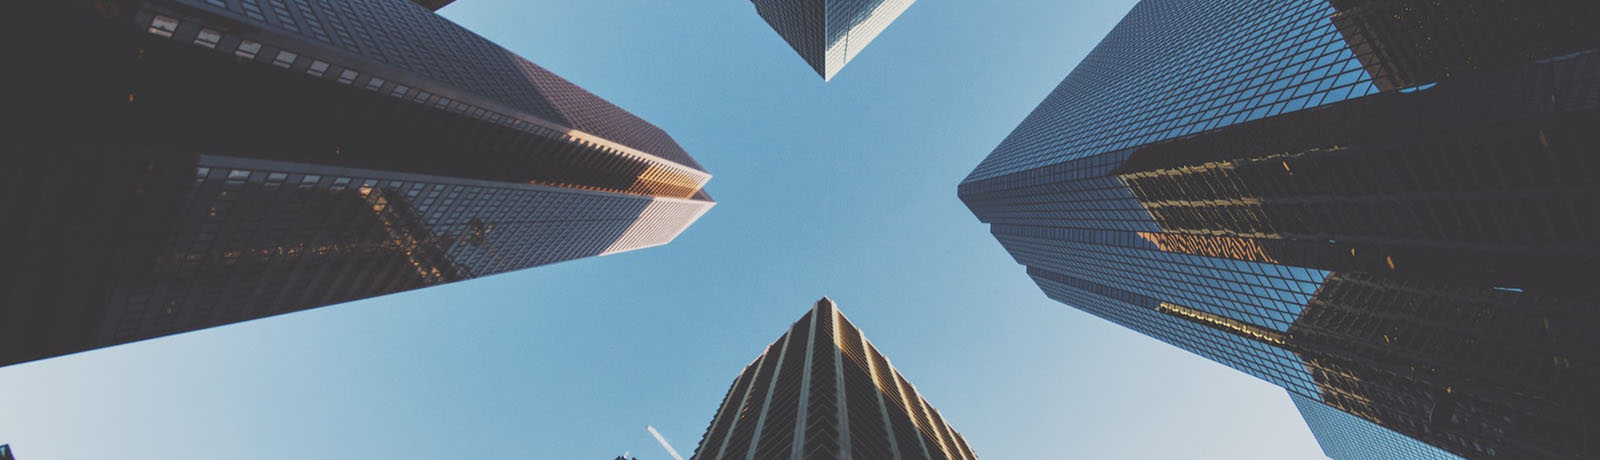 A circle of skyscrapers from the perspective of a photographer looking directly upwards into the sky